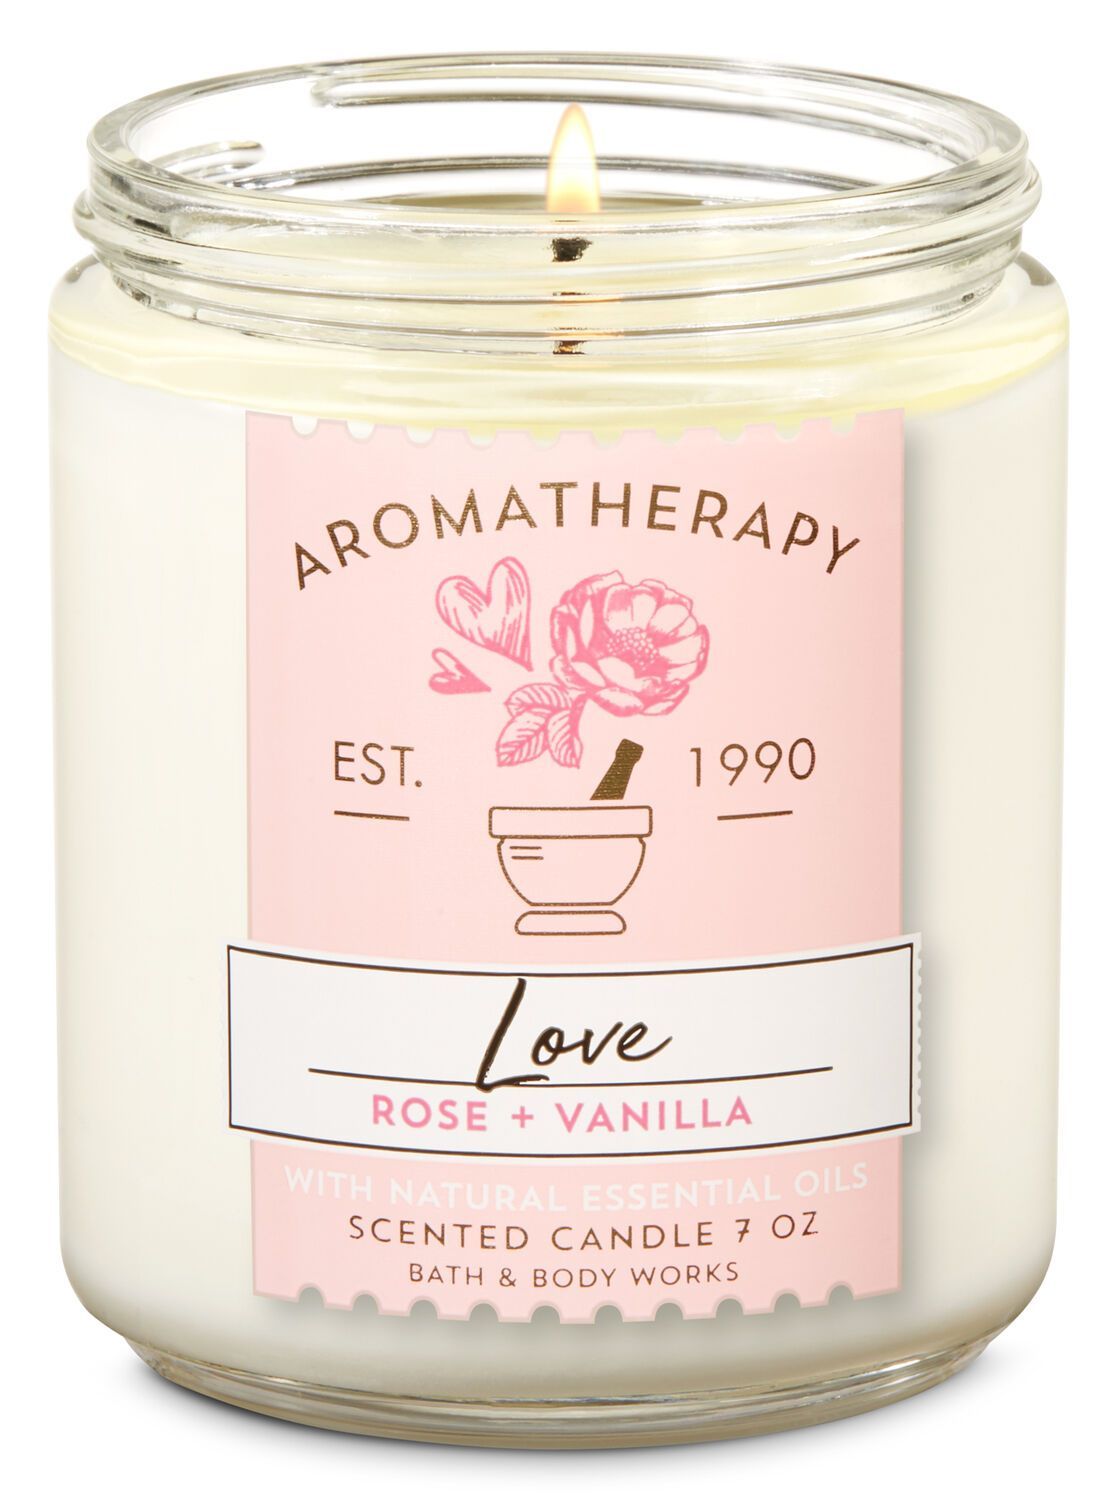 Rose Vanilla Single Wick Candle - Aromatherapy - Rose Vanilla Single Wick Candle - Aromatherapy -   15 diy Candles bath and body works ideas